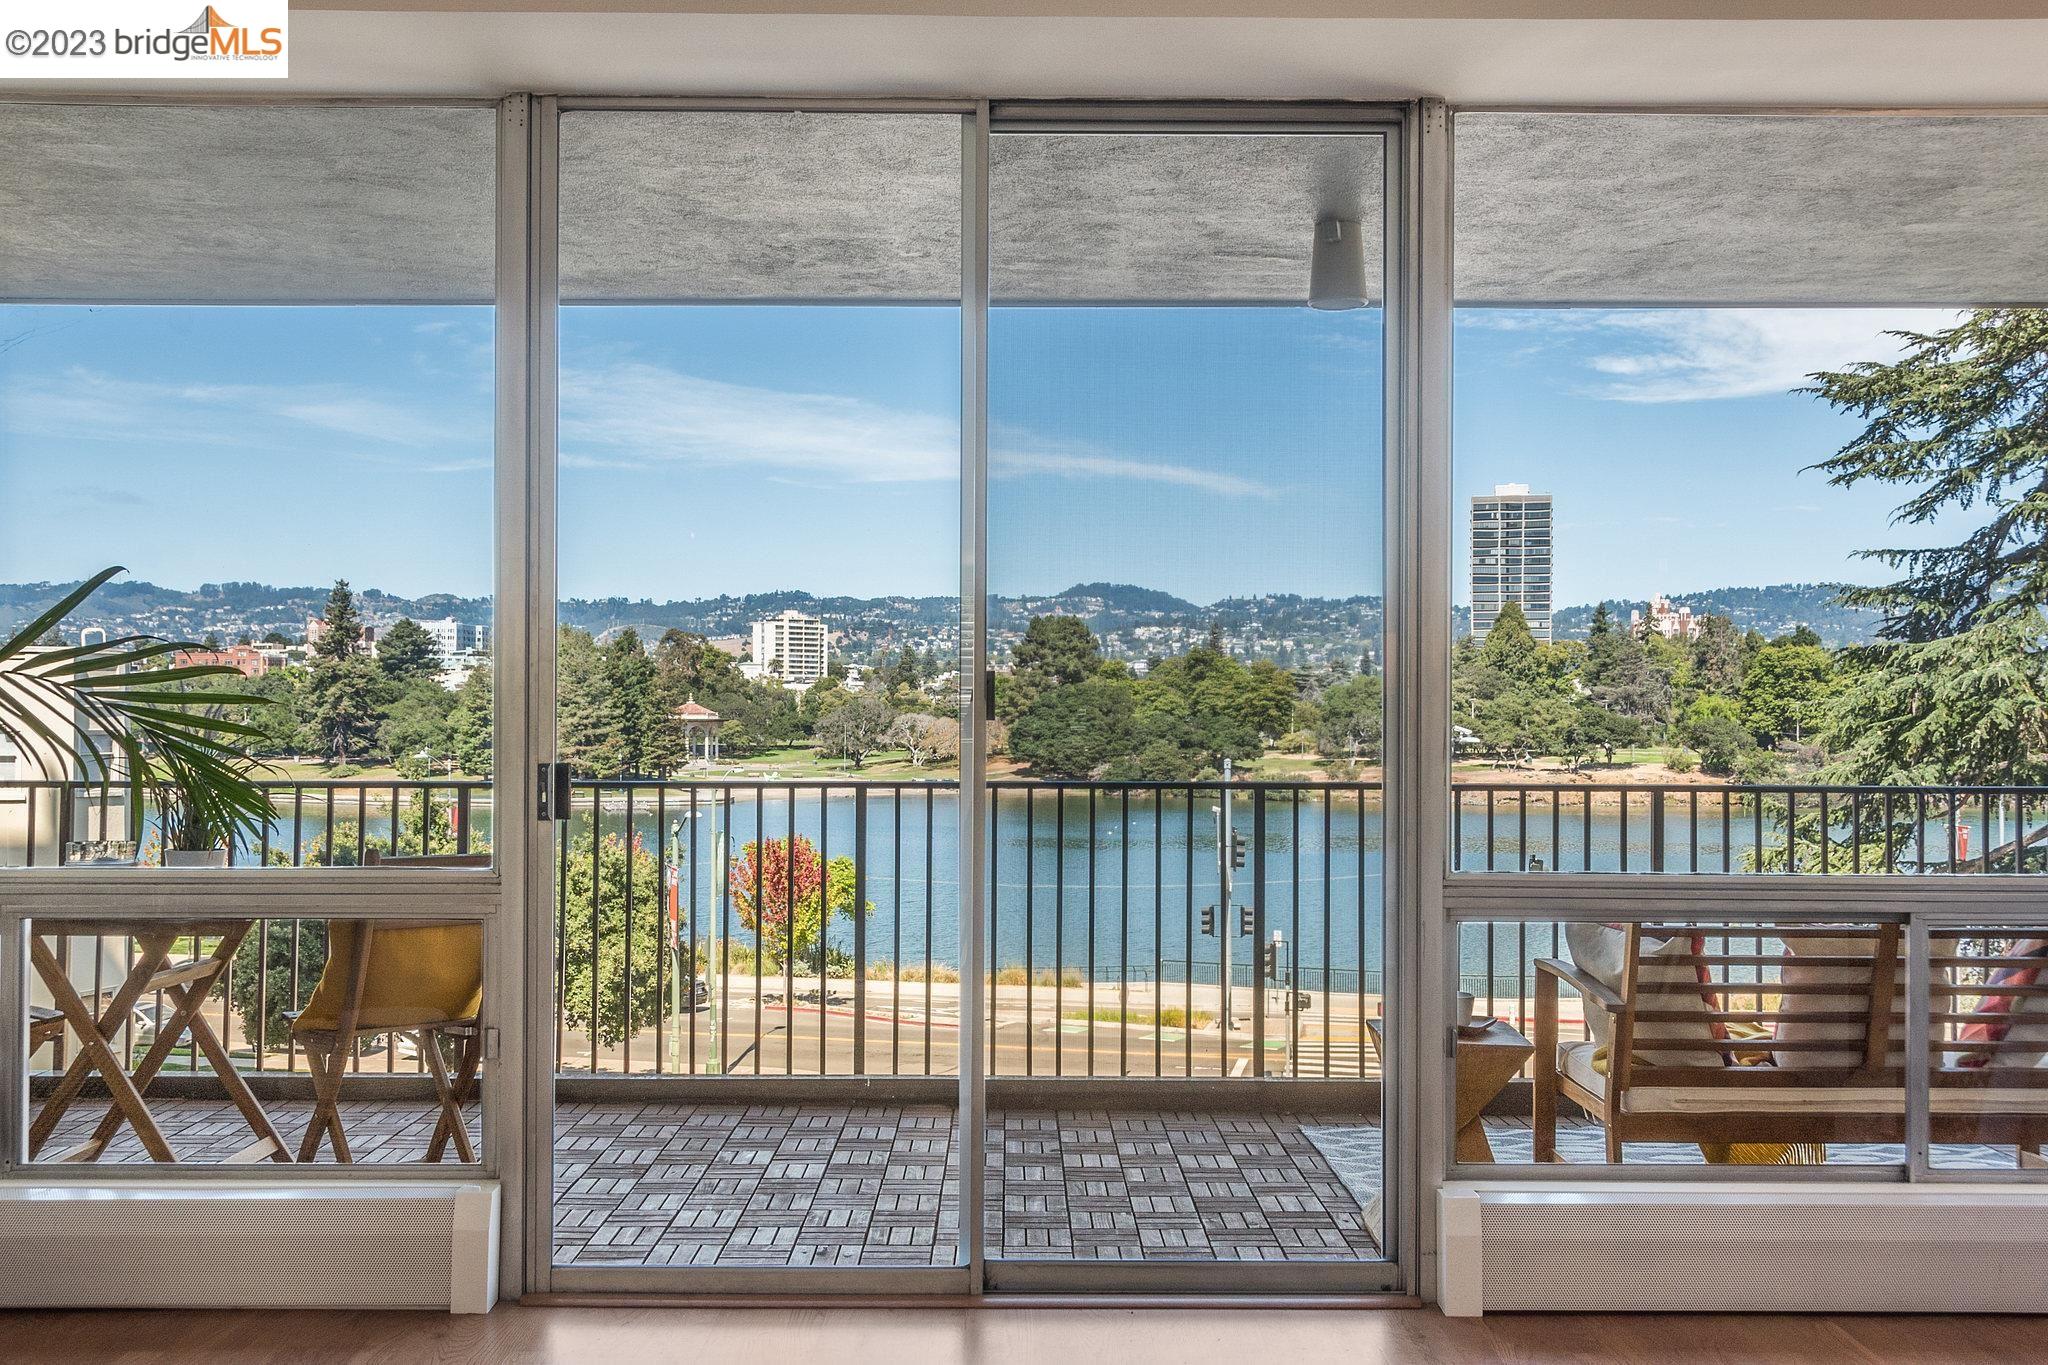 Enjoy the epitome of beauty & brawn in this spacious Lake Royal Co-Op unit. Soak in the simply stunning Lake Merritt views, perfectly framed by walls of glass that fill the spaces with an abundance of light. The expansive 40'+/- balcony spans the length of the unit offering a luxurious extension of the living space, Perfect for al-fresco dining, entertaining, lounging & even gardening. The apartment is tastefully updated throughout. The floorplan boasts a perfect separation of private & public rooms. The entry opens to the generous Living on one side which flows seamlessly into the Formal Dining room on the other that opens to the kitchen. Three bedrooms, including a generous primary suite, are ideally located on the other end offering privacy. The property is located just steps from beautiful Lake Merritt and accessible to BART, bus, entertainment, restaurants, Downtown Oakland, Whole Foods & the Lakeshore District. Secure parking with interior building access & 24-hour doorman. A $9+/- MILLION DOLLAR BUILDING SEISMIC RETROFIT was completed in 2019.  The building offers 2  community spaces for socializing & relaxing. The roof-top deck has panoramic Lake, City & Oakland Hills views & the newly remodeled lower patio is an ideal gathering spot. Truly a special offering & community!